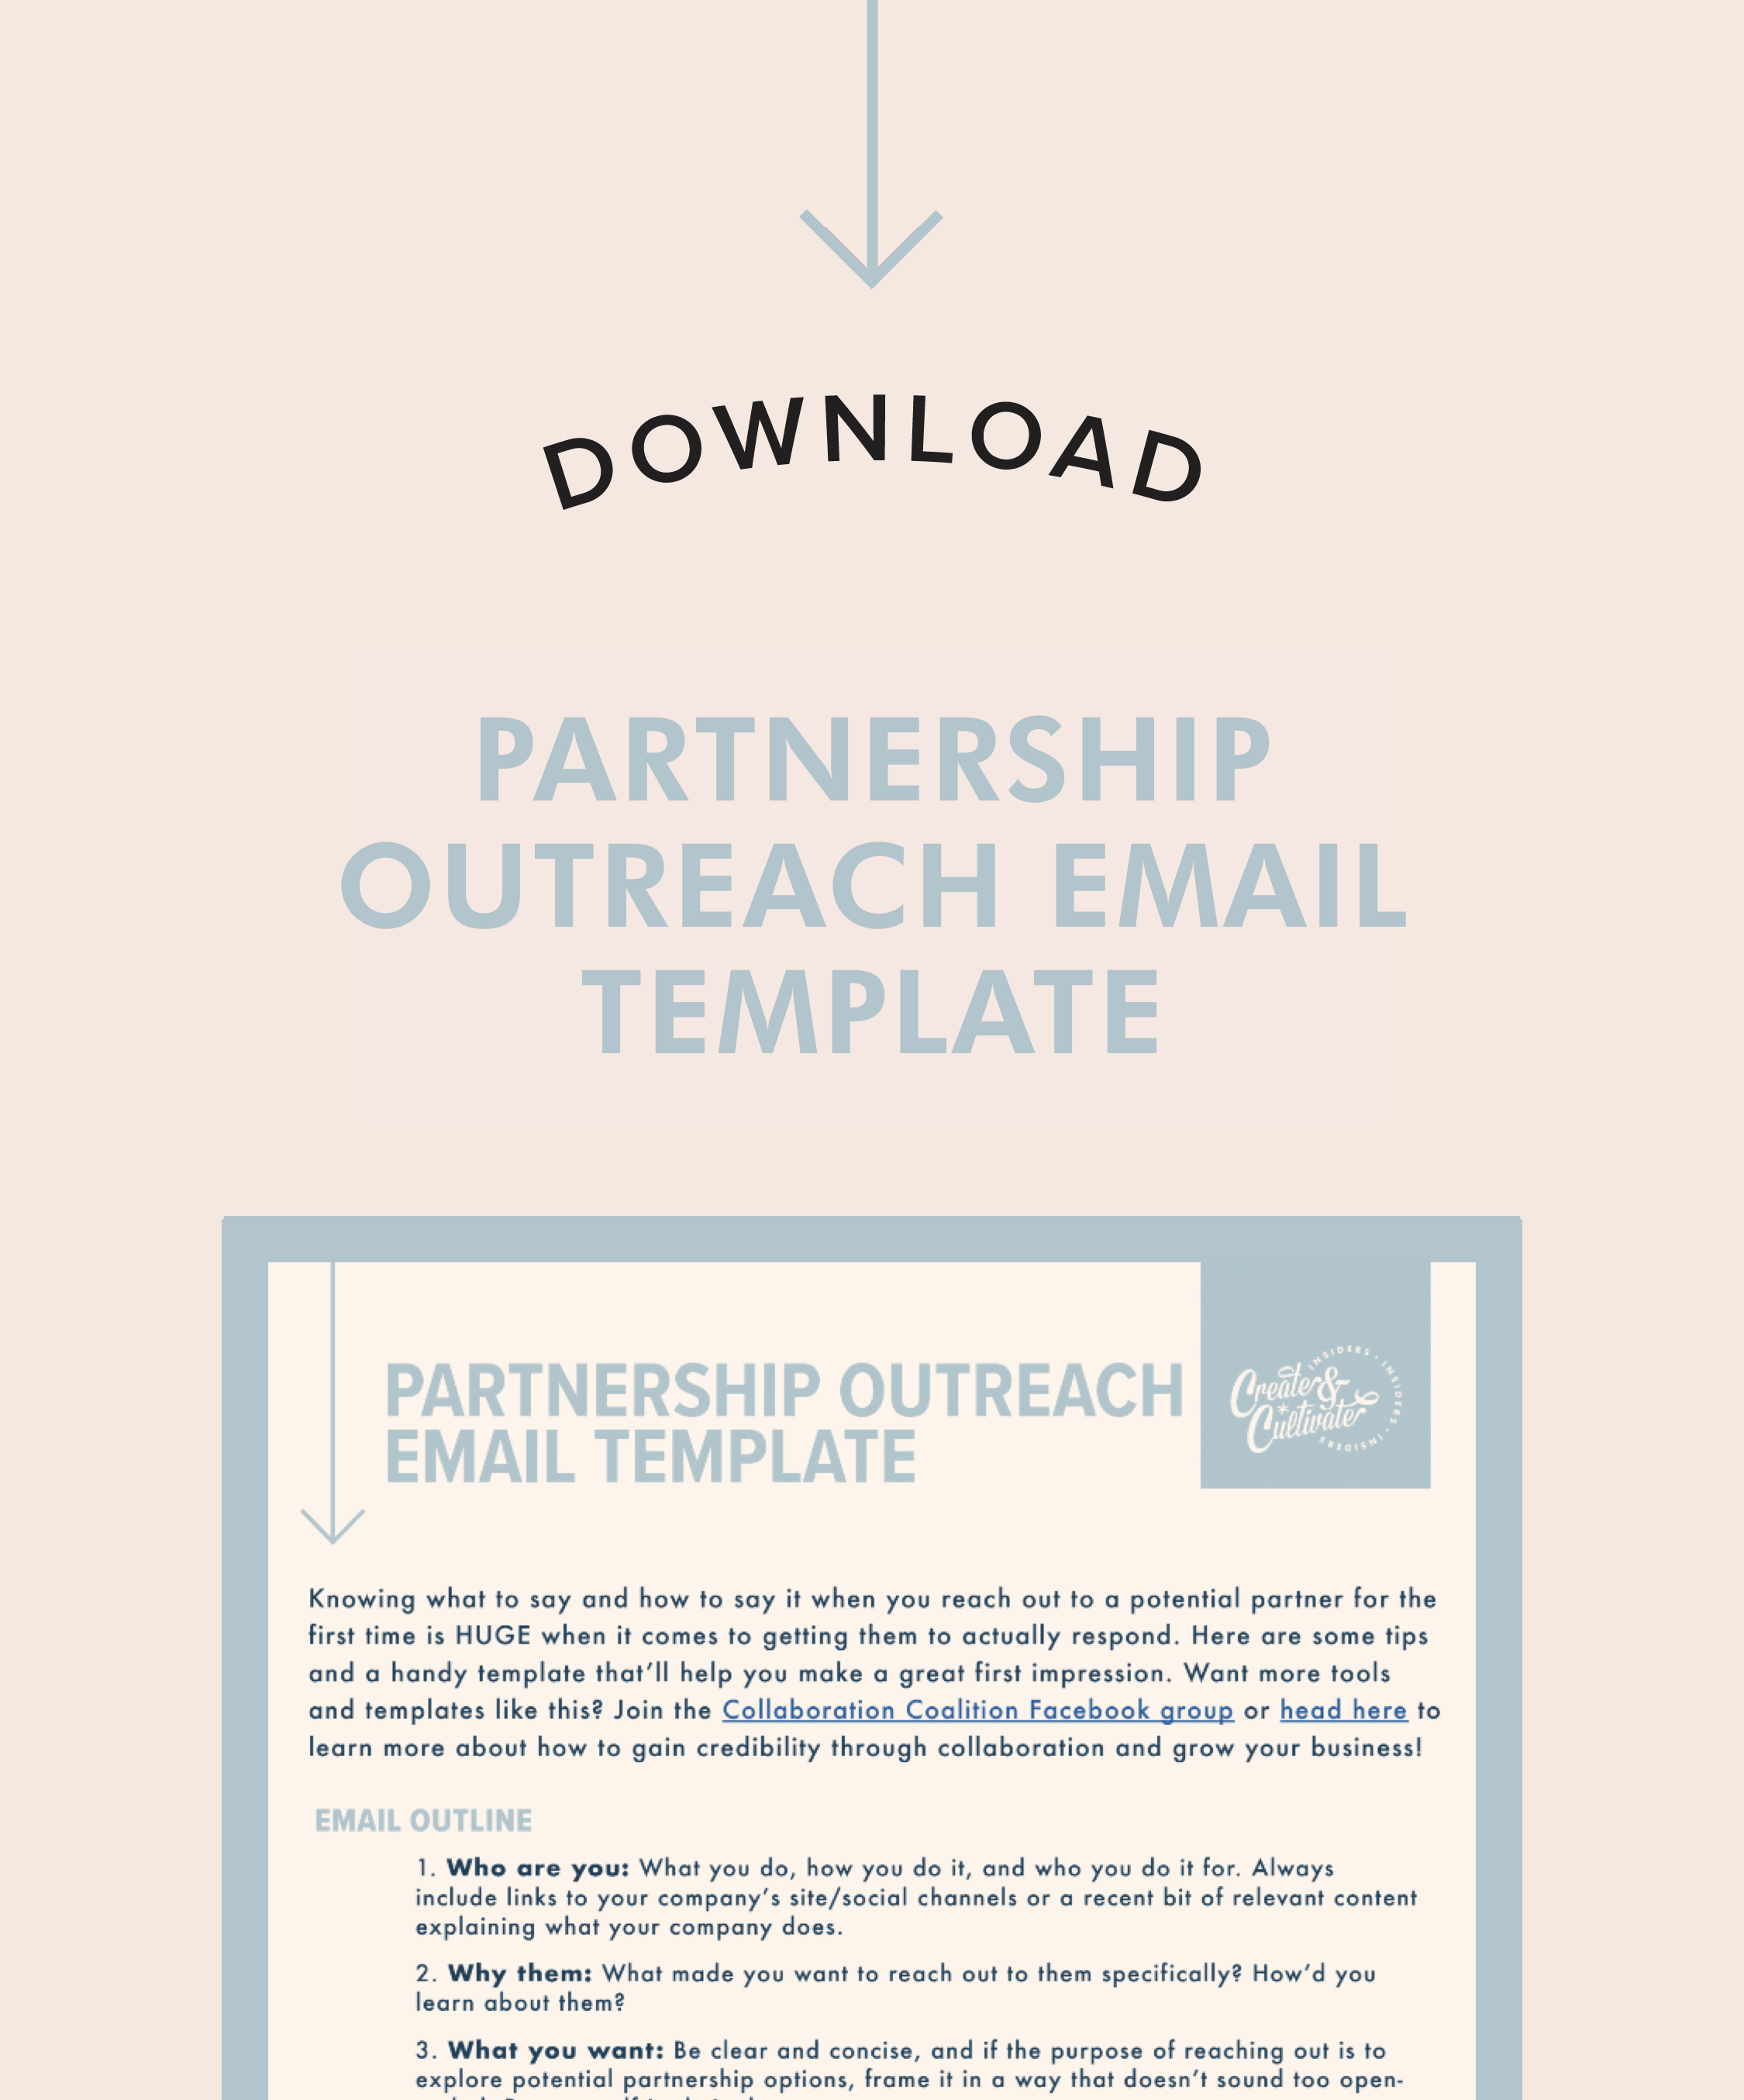 Partnership Outreach Email Template — Create + Cultivate